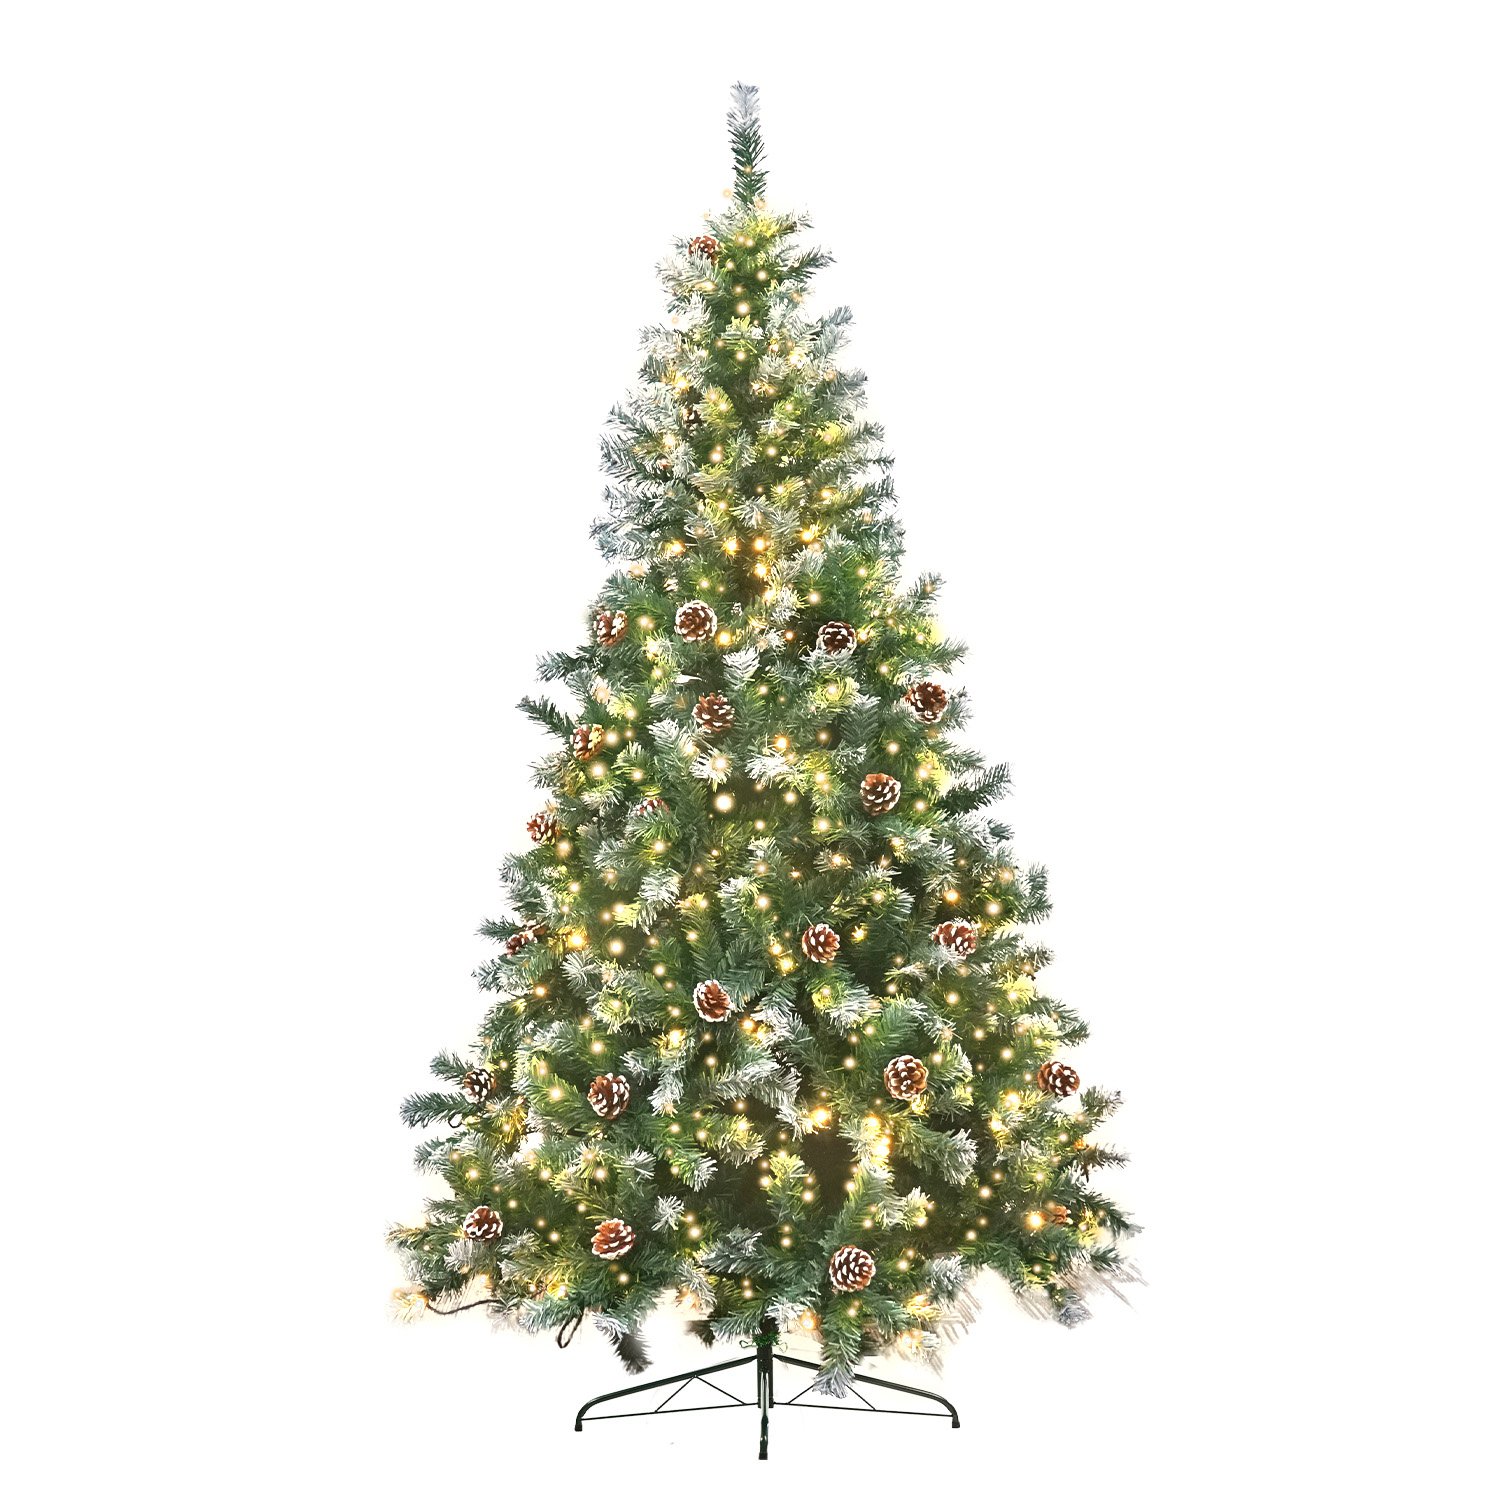 Christabelle 1.5m Pre Lit LED Christmas Tree with Pine Cones 2